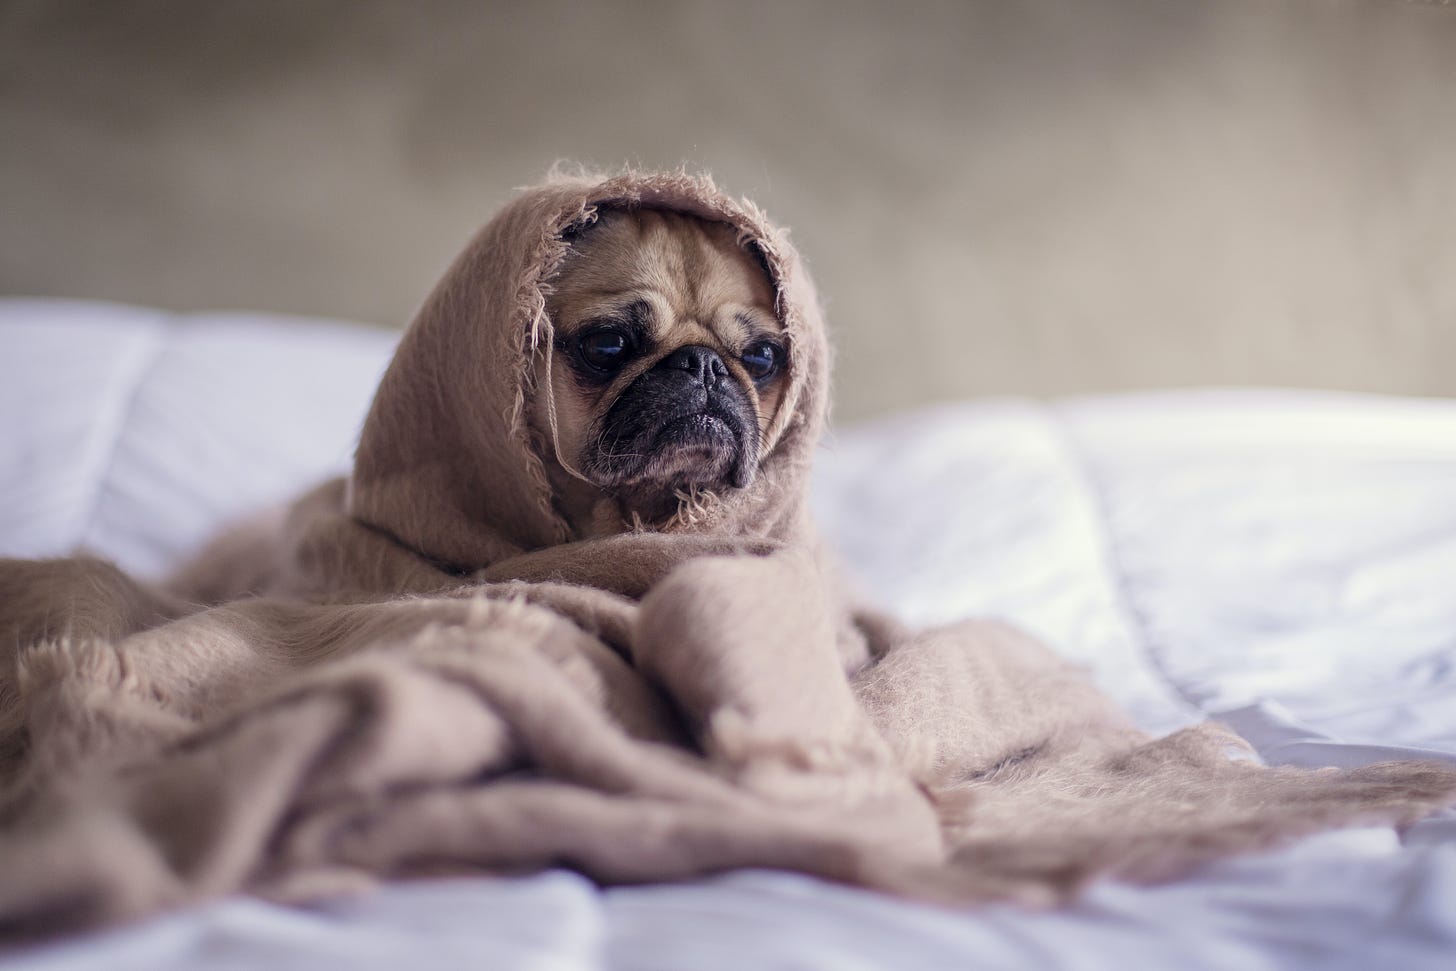 Pug dog wrapped in a blanket like a little old lady cozy on a soft surface